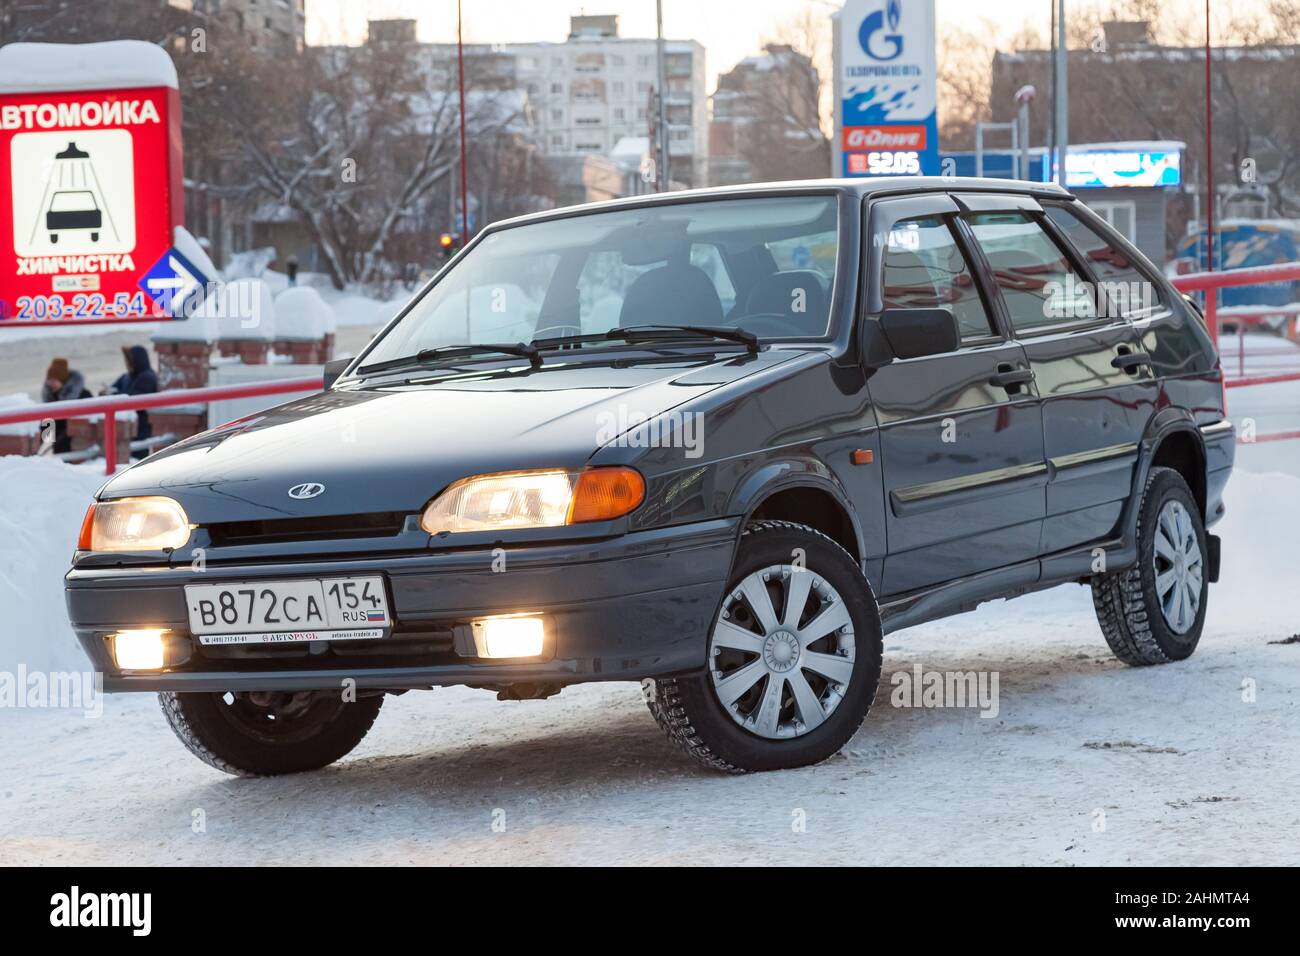 Novosibirsk, Russia - 12.26.2019: Green lada 2114 year front view with dark gray interior in excellent condition in a parking space among other cars Stock Photo